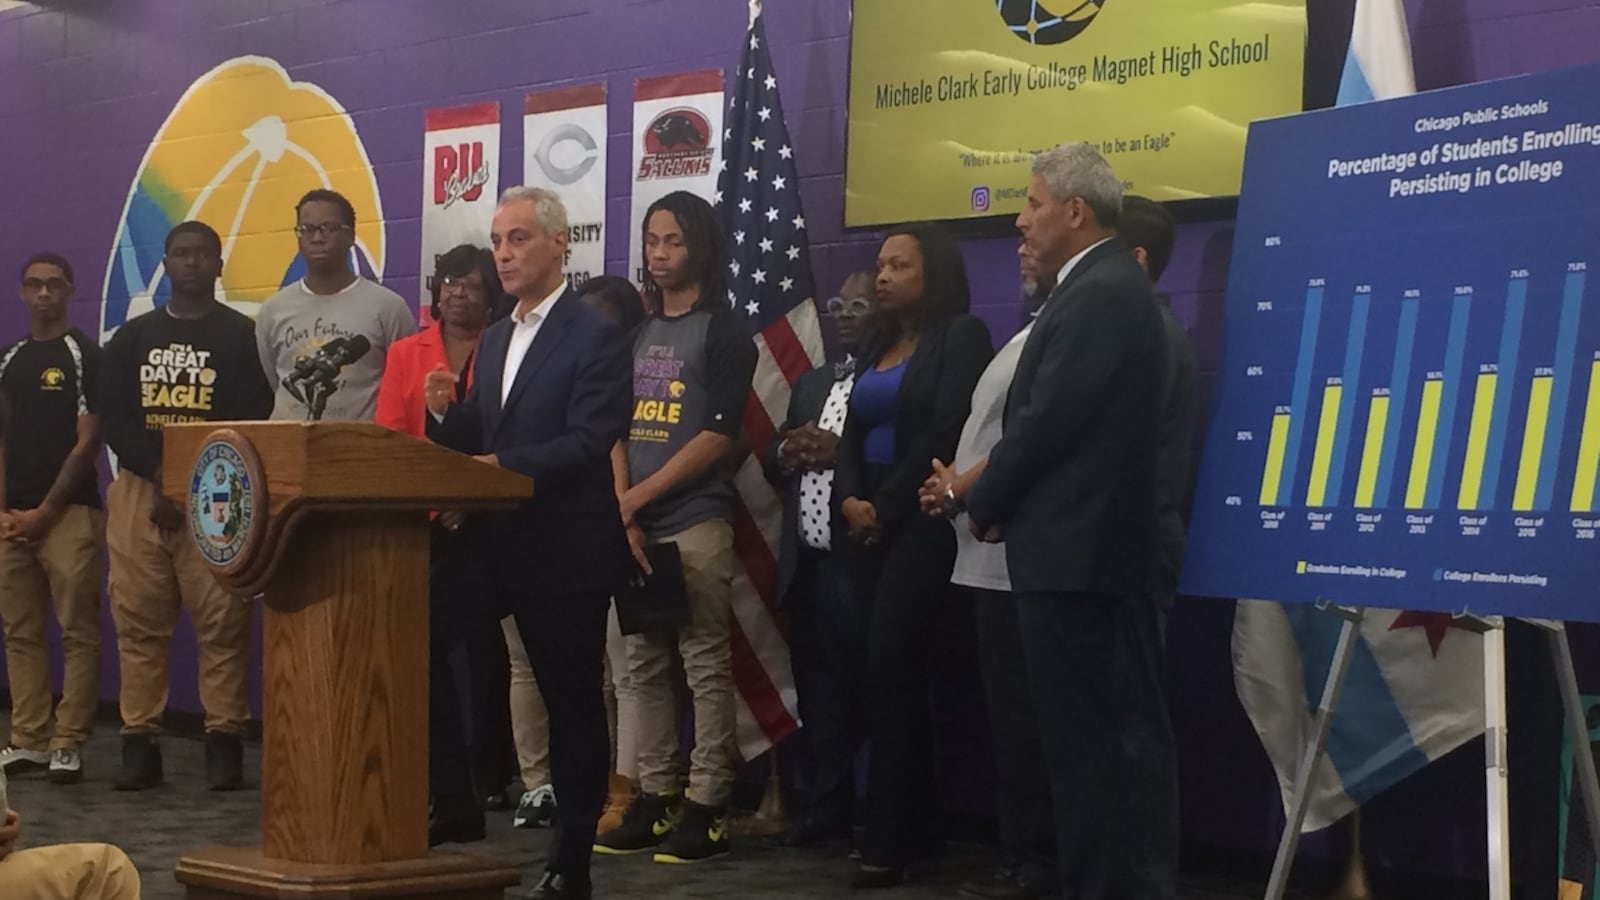 Mayor Rahm Emanuel, CPS CEO Janice Jackson, and other city officials convened at Michele Clark Magnet High School in the Austin neighborhood to announce the latest college enrollment statistics.